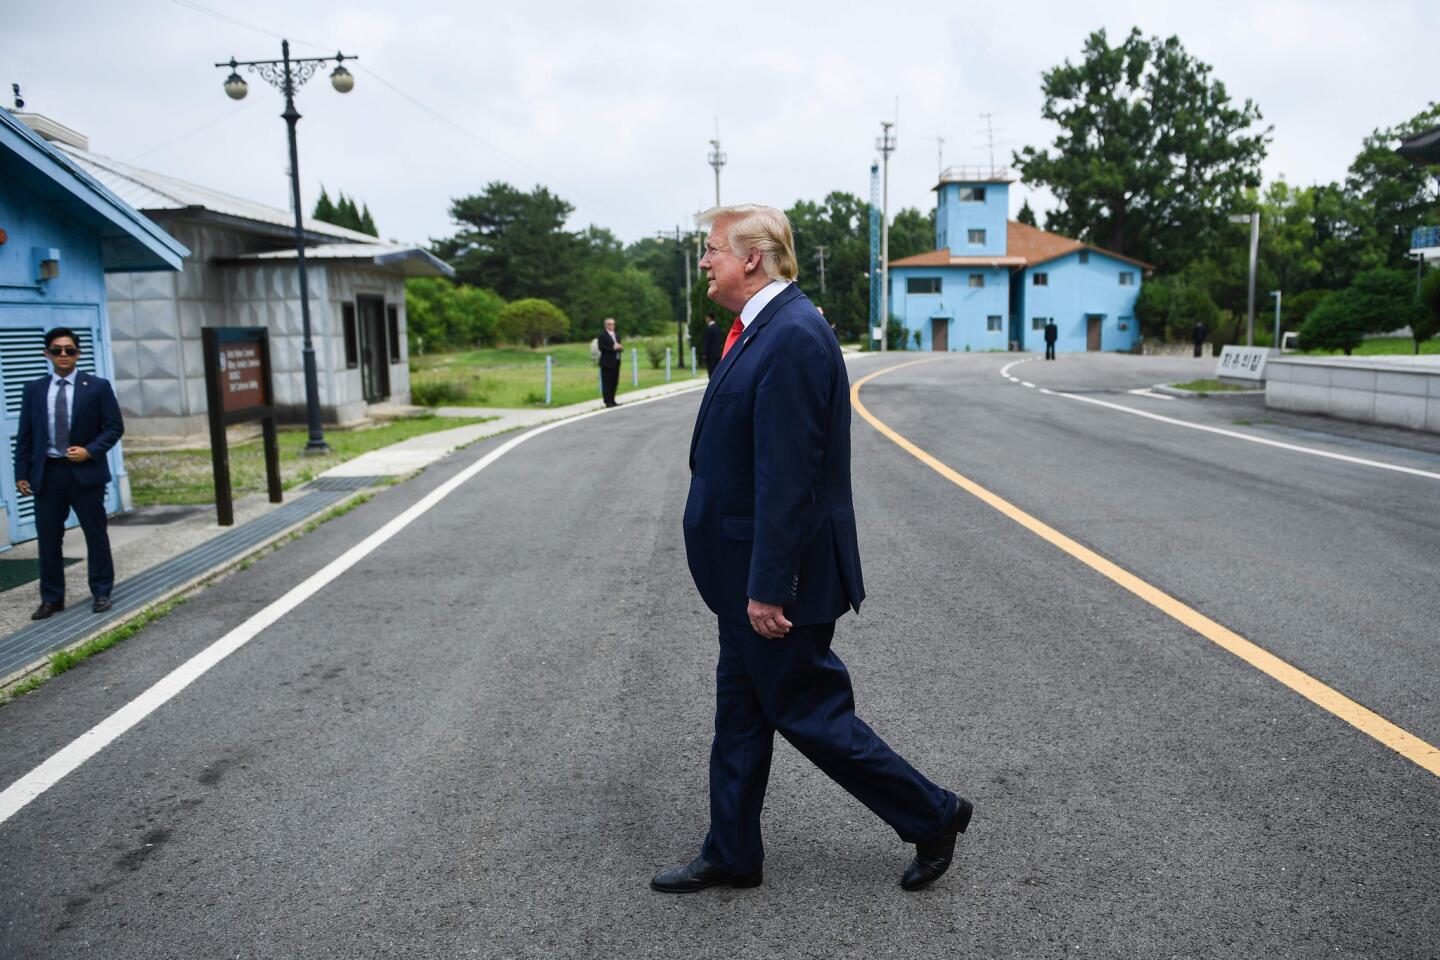 President Trump walks toward the Military Demarcation Line that divides North and South Korea.